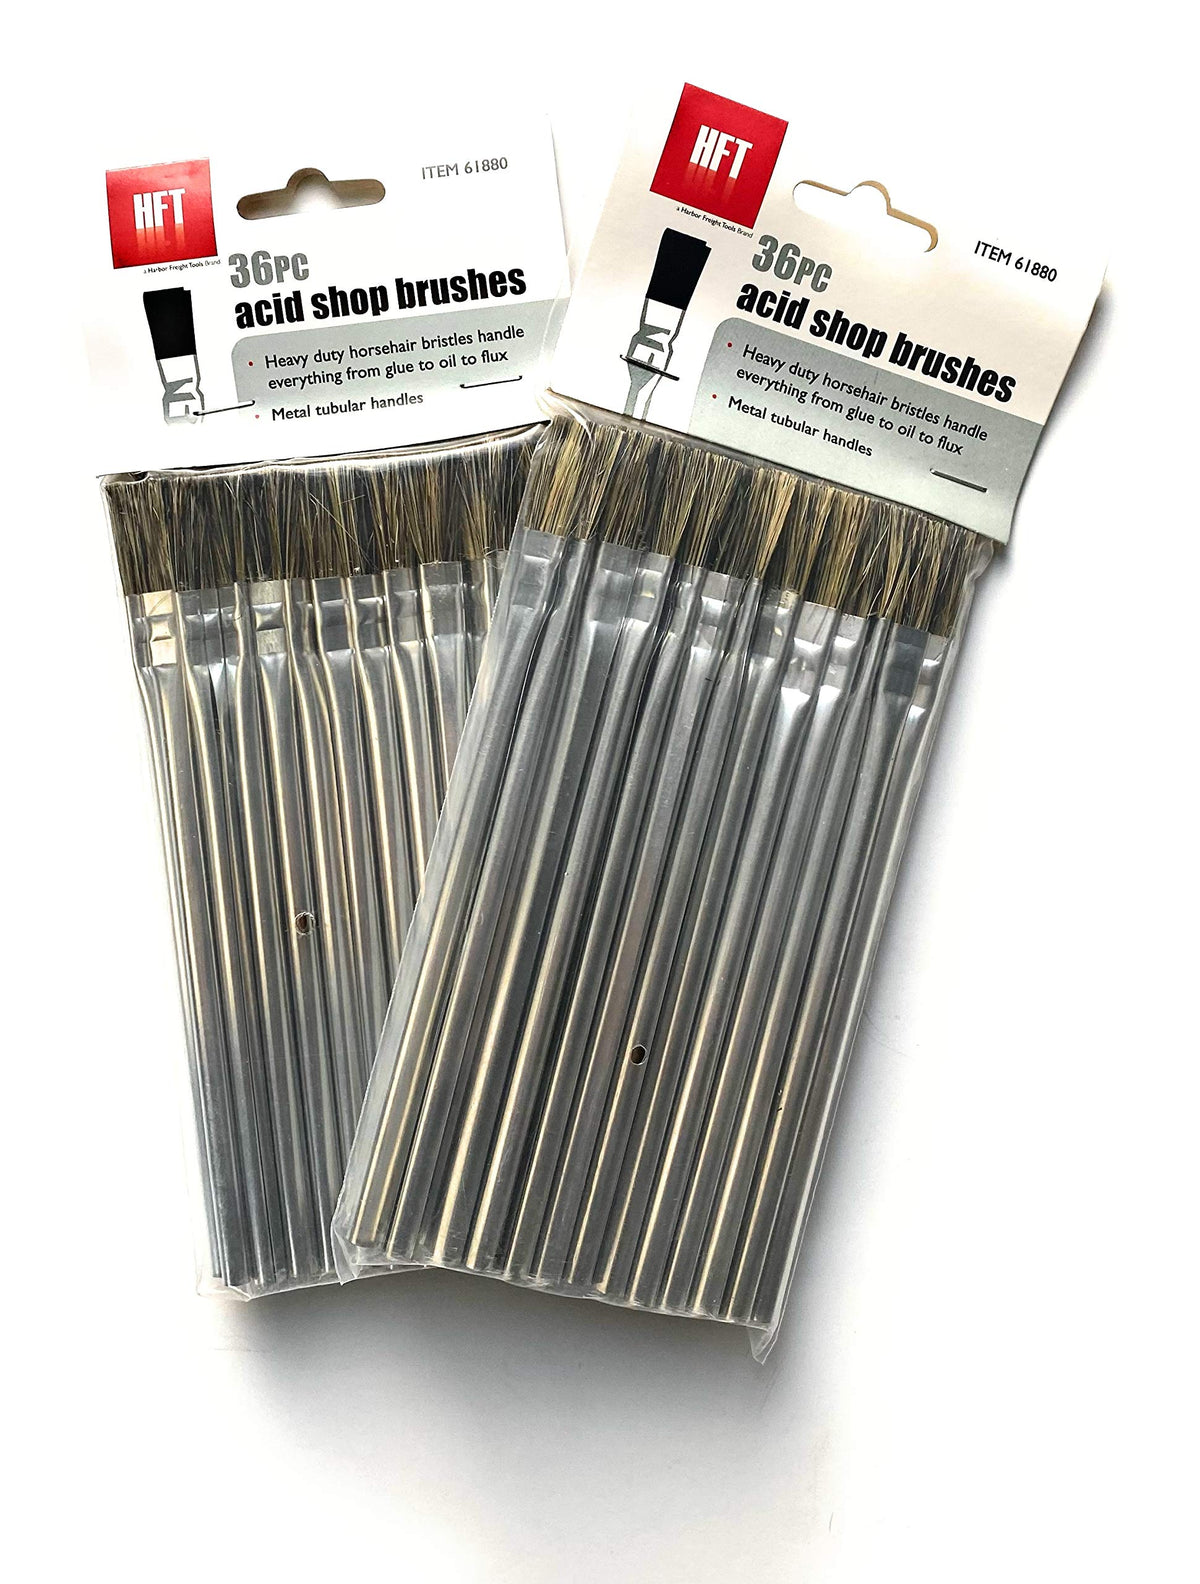 Tin Horsehair Disposable Acid Shop Brushes Made in USA